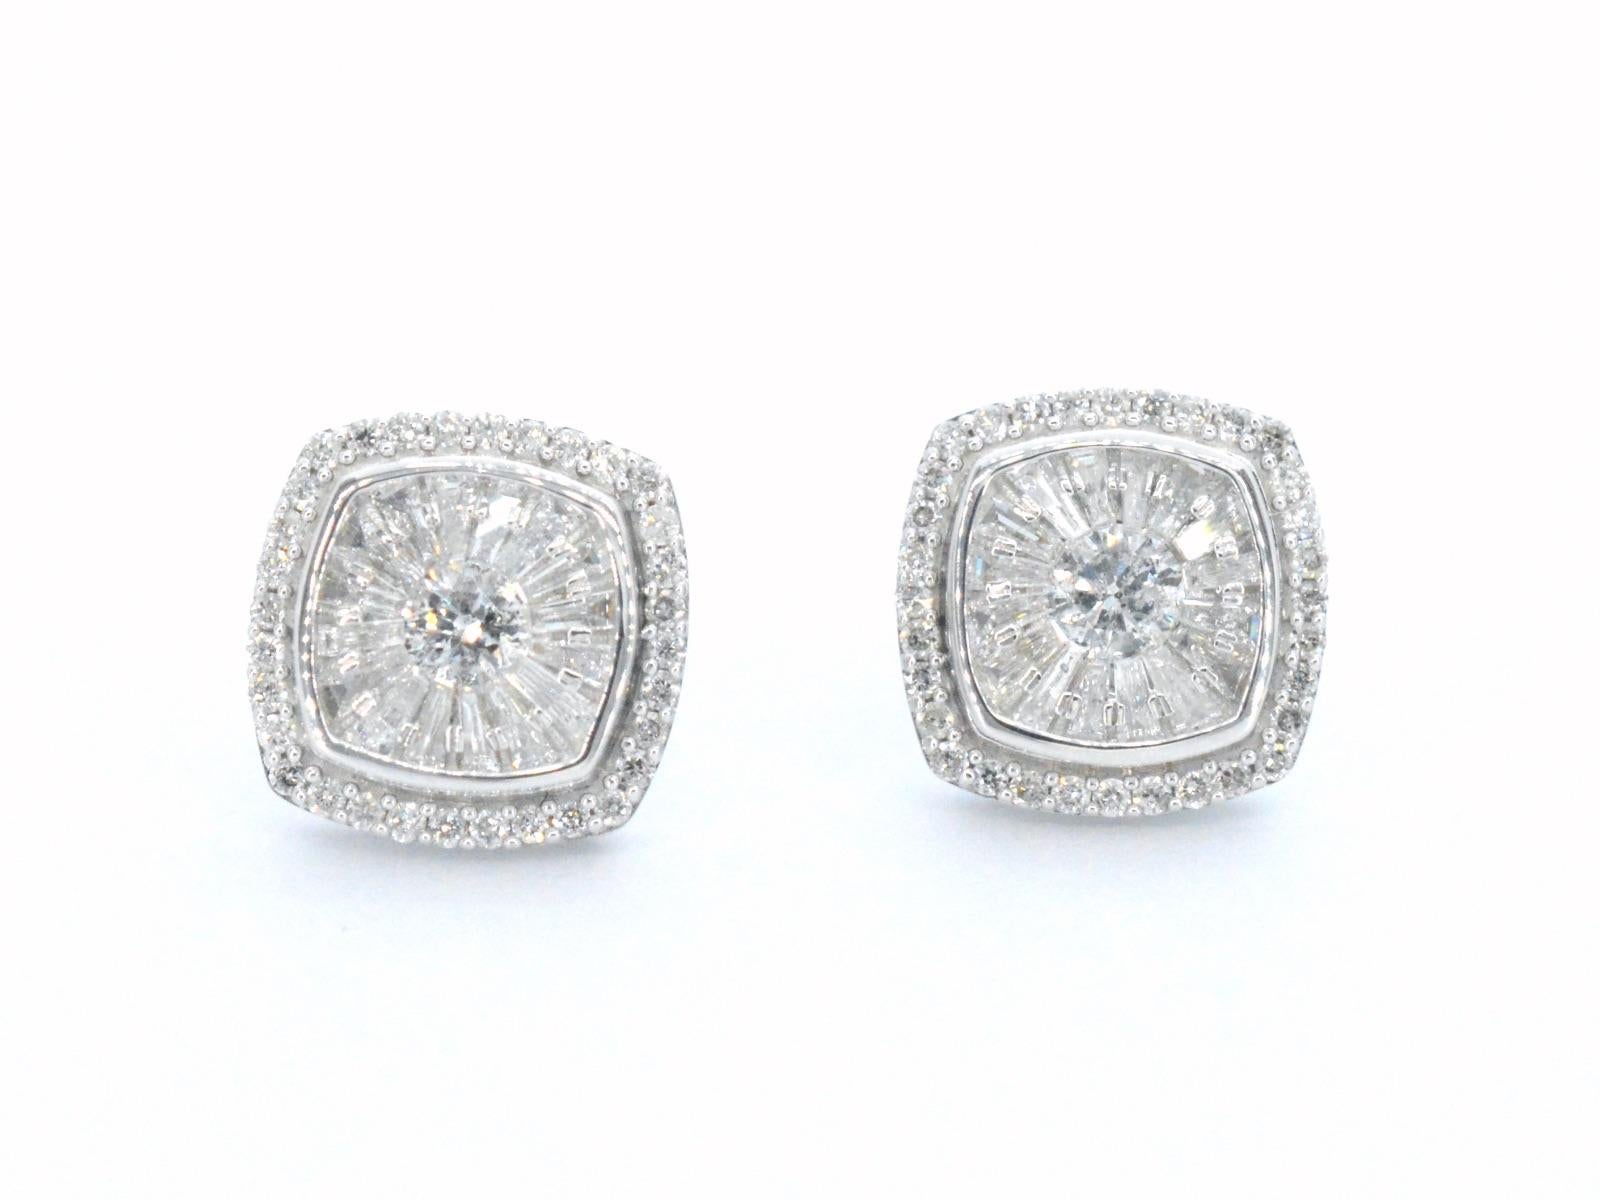 Contemporary White Gold Entourage Earrings Set with 1.20 Carat For Sale